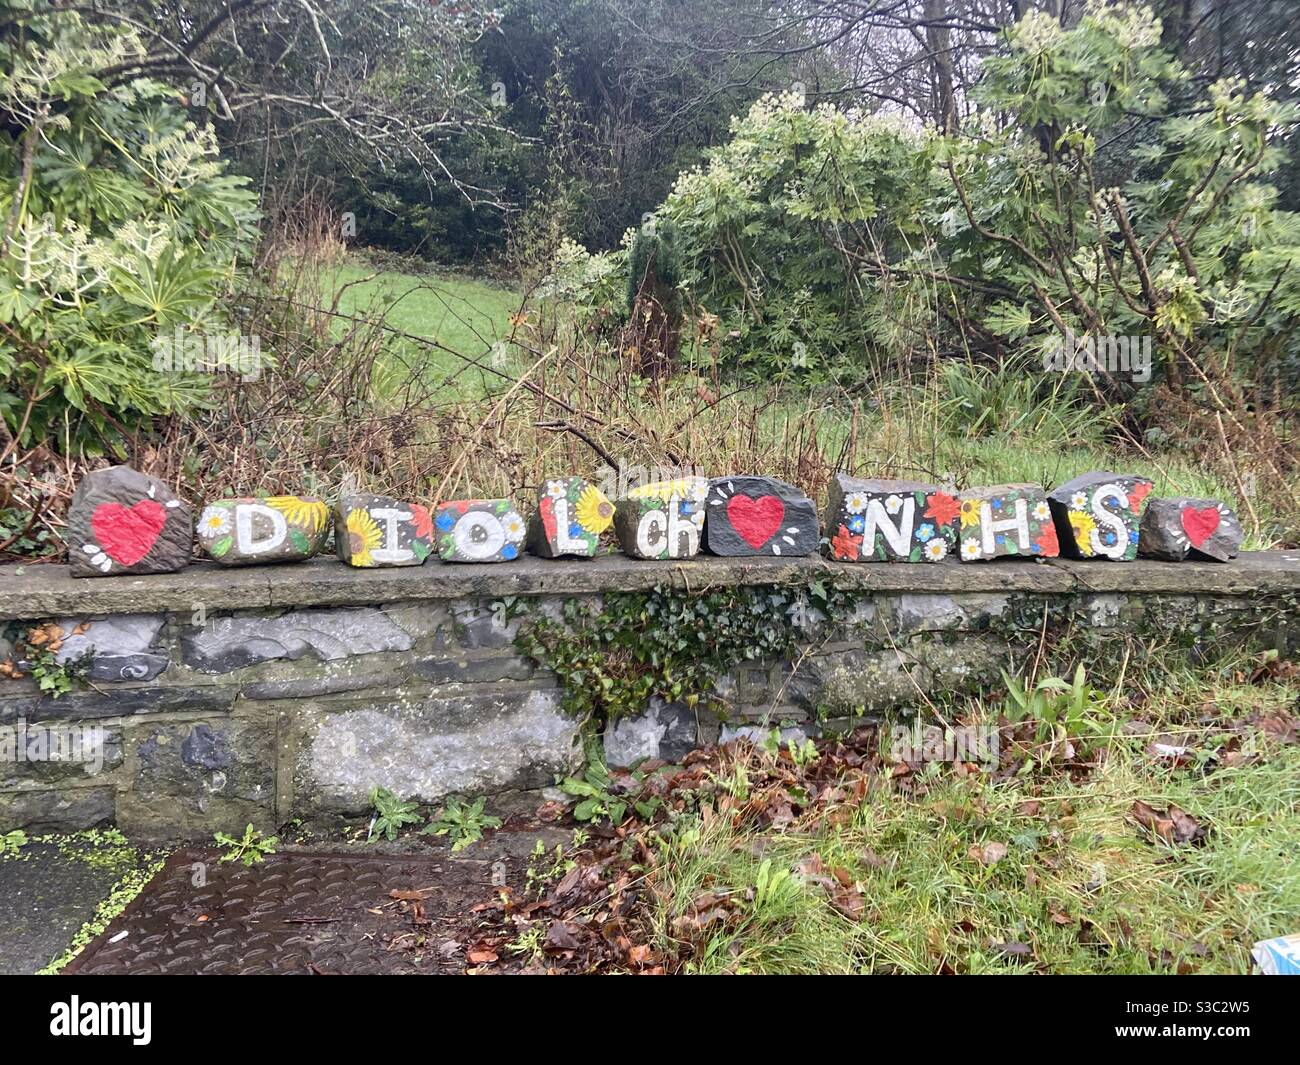 Aberystwyth, West Wales, UK. Monday 28th December 2020. News: a memorial to say Diolch NHS has been made in Aberystwyth by the hospital during covid 19. Photo Credit ©️Rose Voon / Alamy Live News. Stock Photo